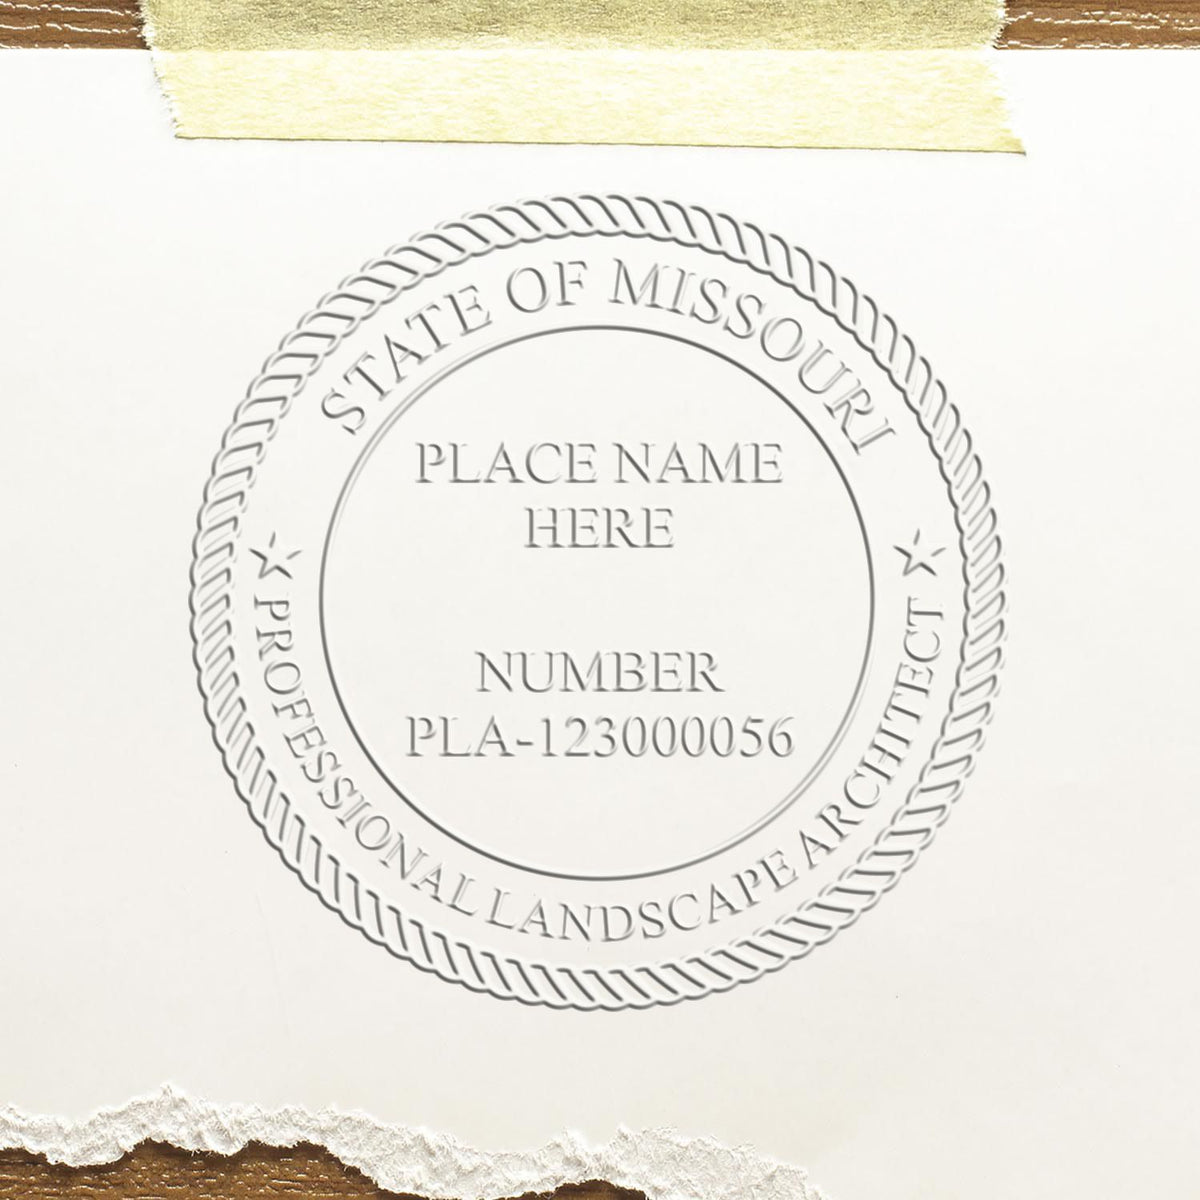 An in use photo of the Hybrid Missouri Landscape Architect Seal showing a sample imprint on a cardstock